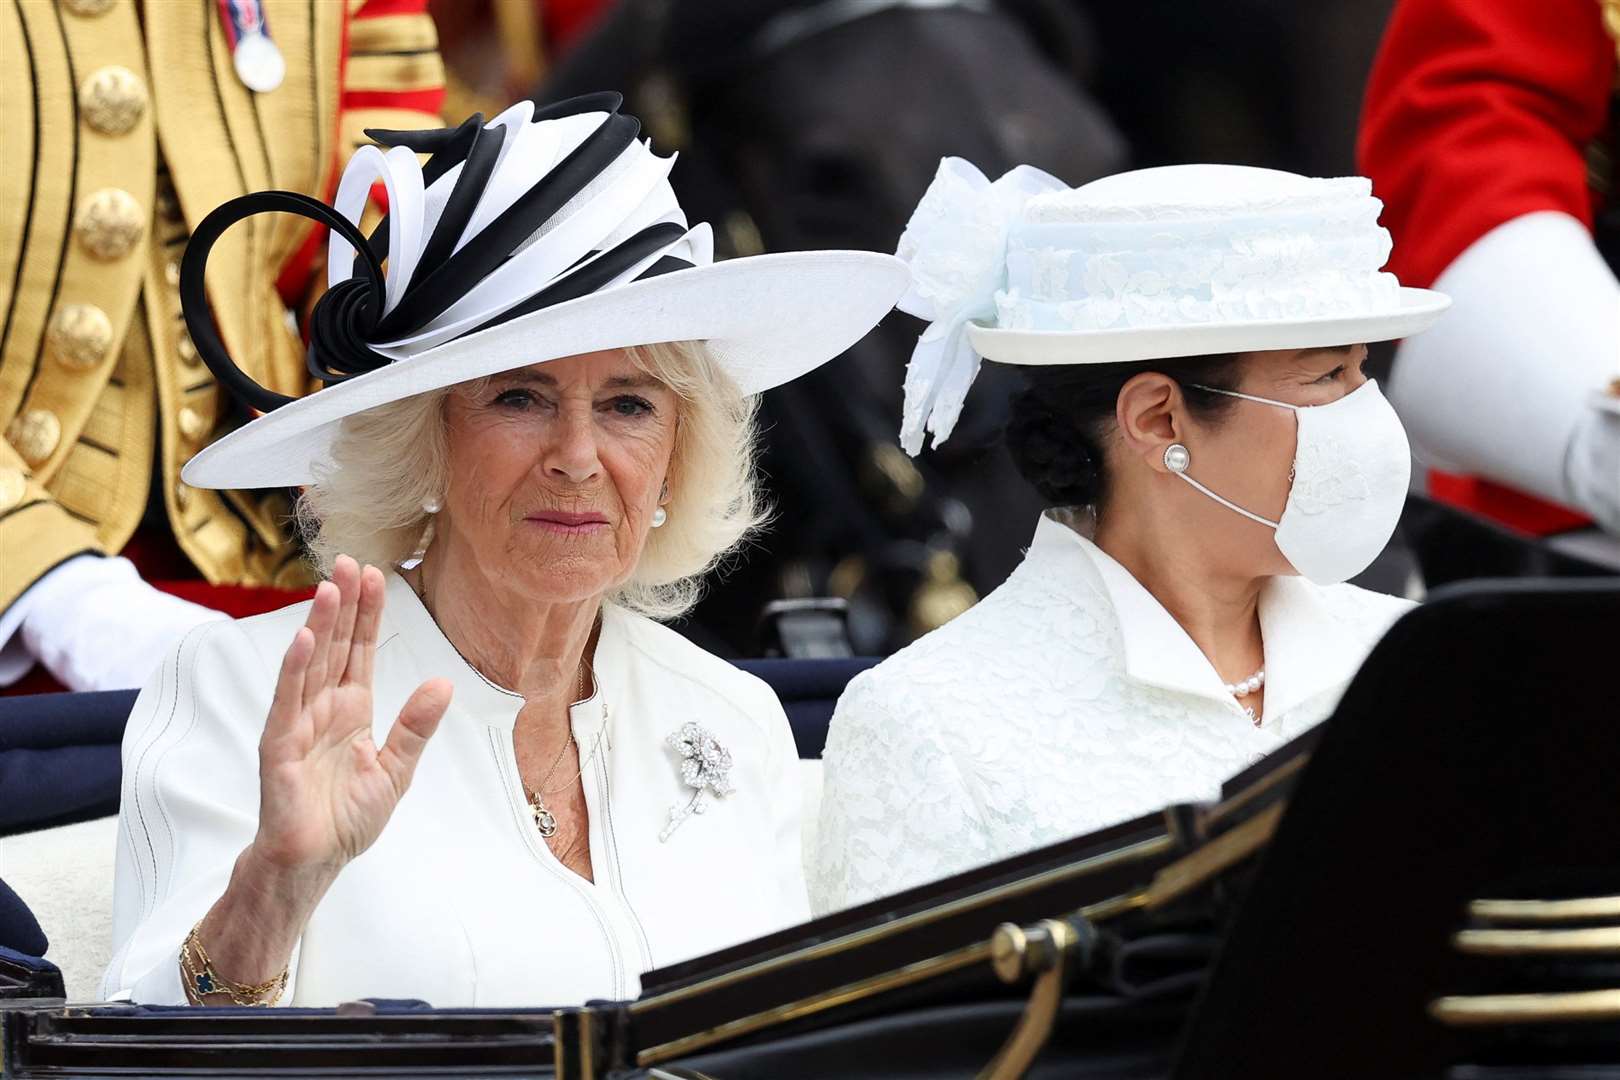 Camilla waves during the procession to the palace (Isabel Infantes/PA)